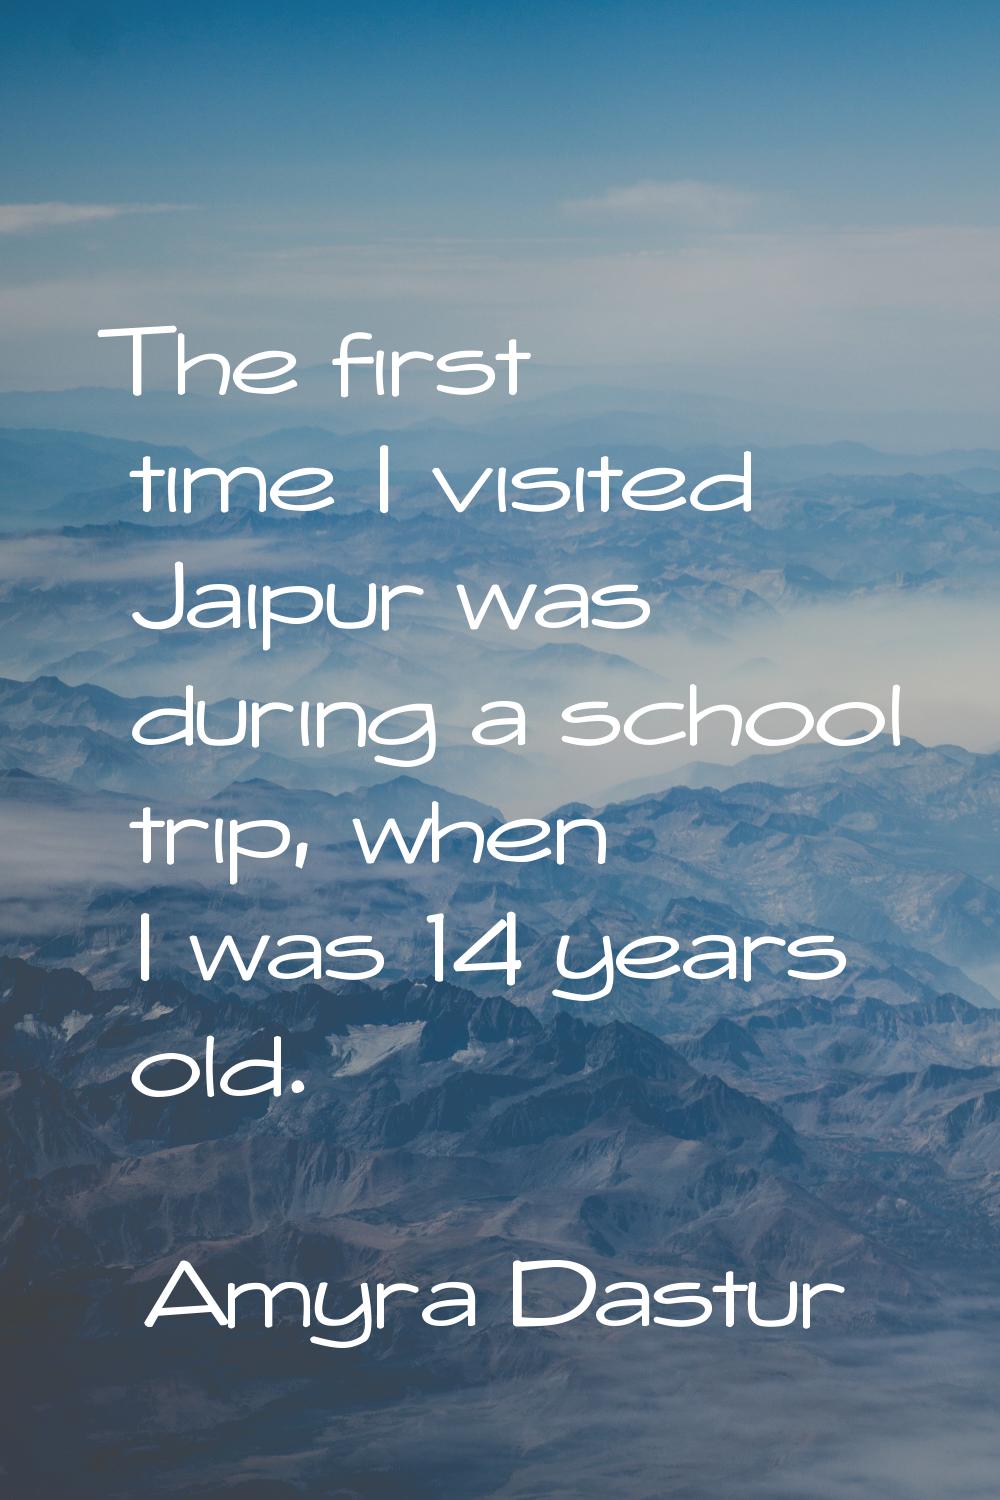 The first time I visited Jaipur was during a school trip, when I was 14 years old.